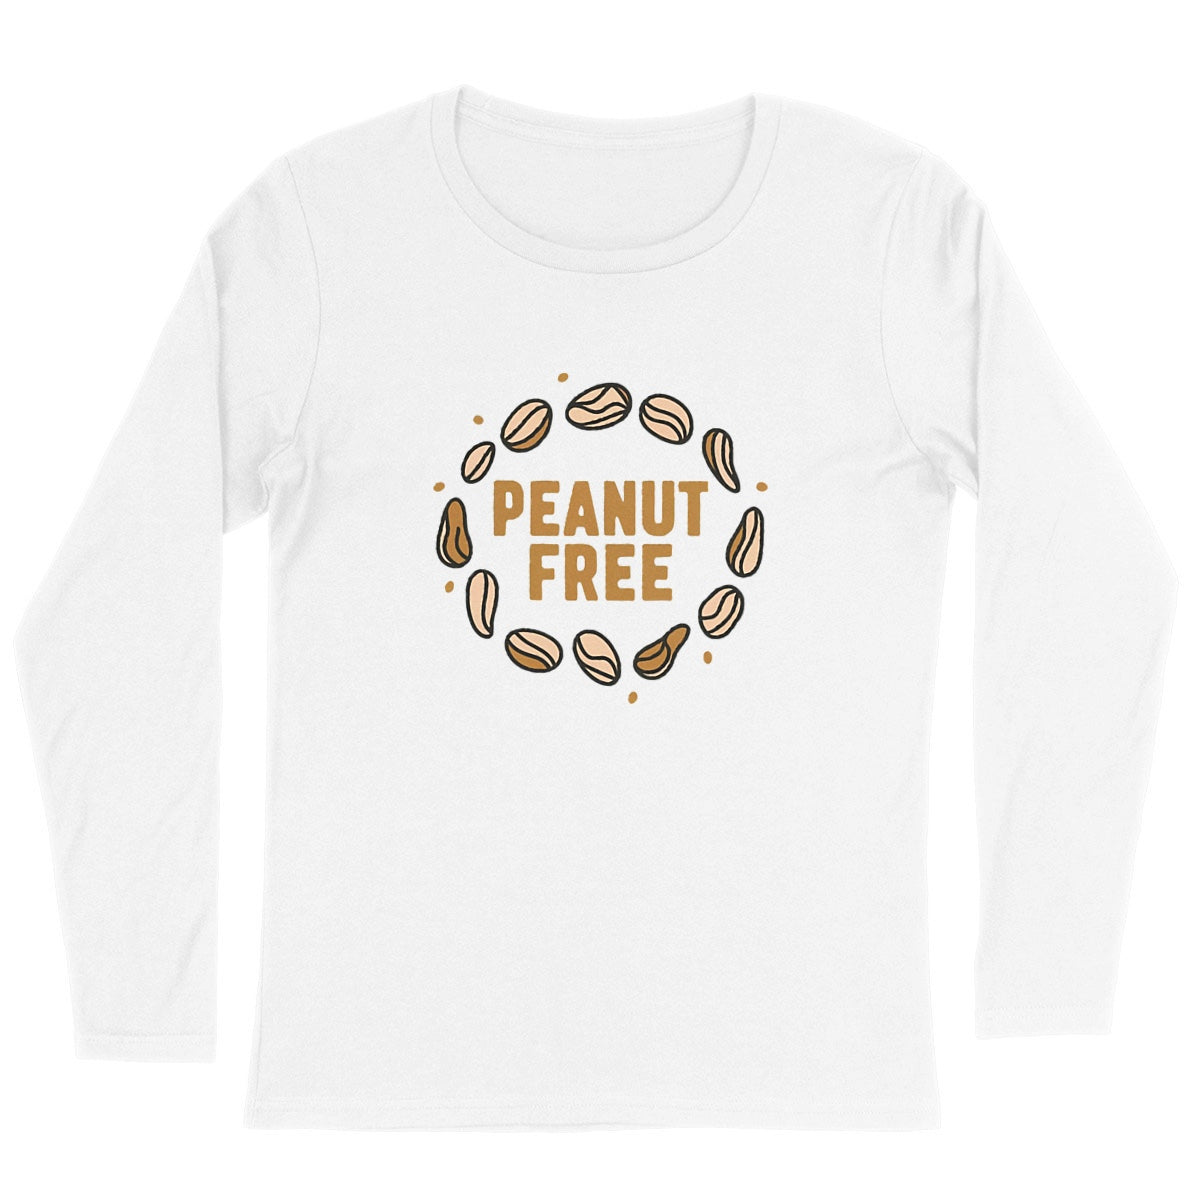 Floating Peanut Free Long Sleeve Organic Cotton Graphic Shirt | Hypoallergenic - Allergy Friendly - Naturally Free